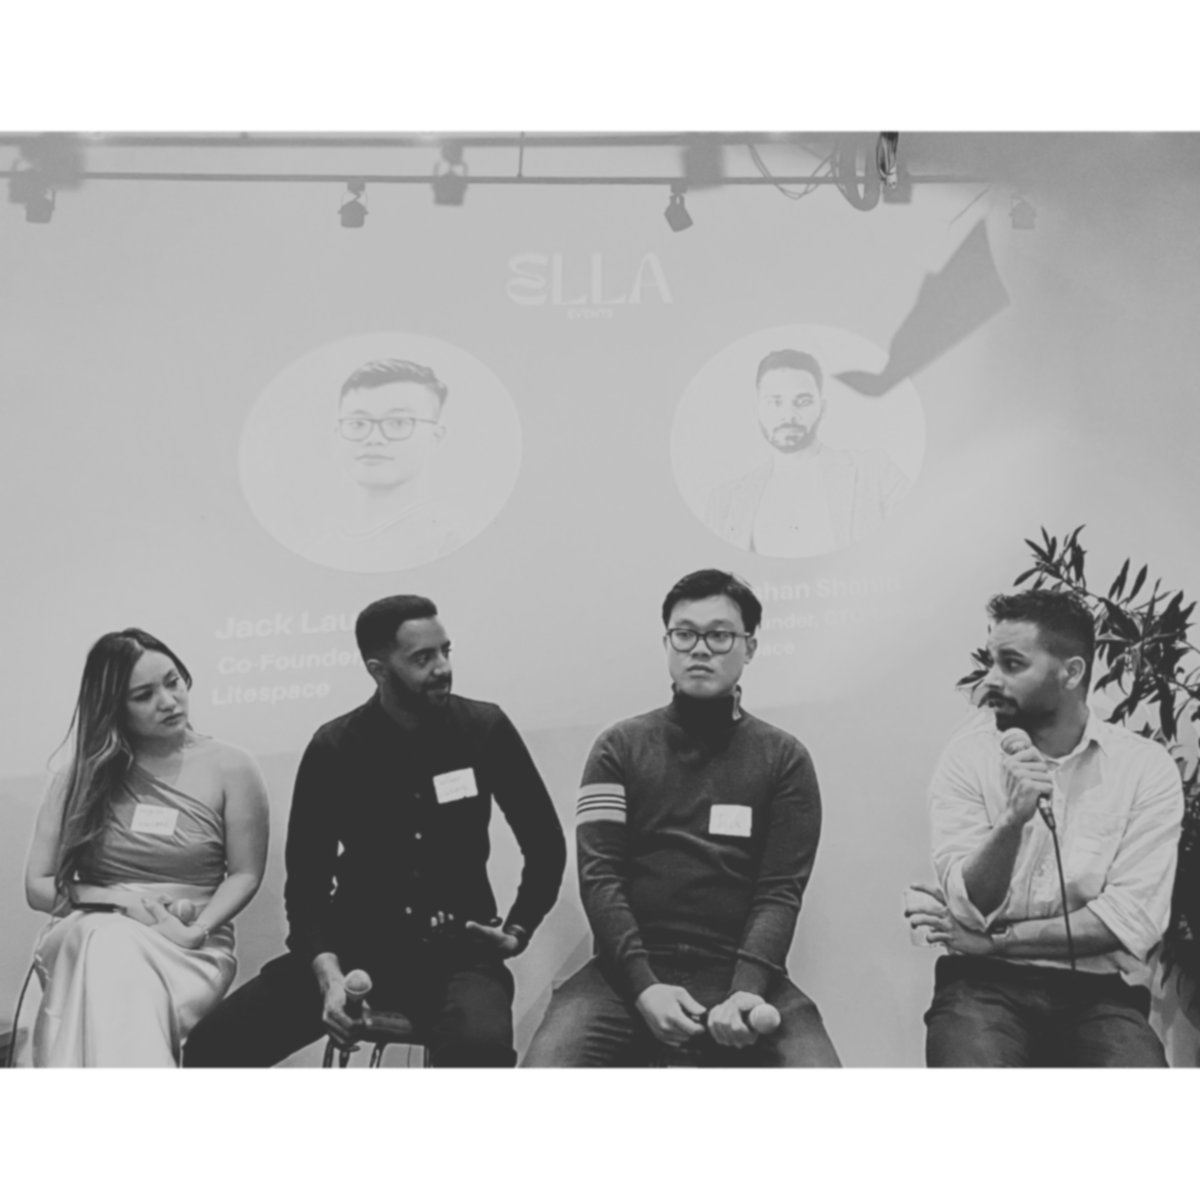 Panel discussion with Angella and Abrham, co-founders of Ella Events, as moderators and Jack and Zeeshan, co-founders of Litespace, as guests.